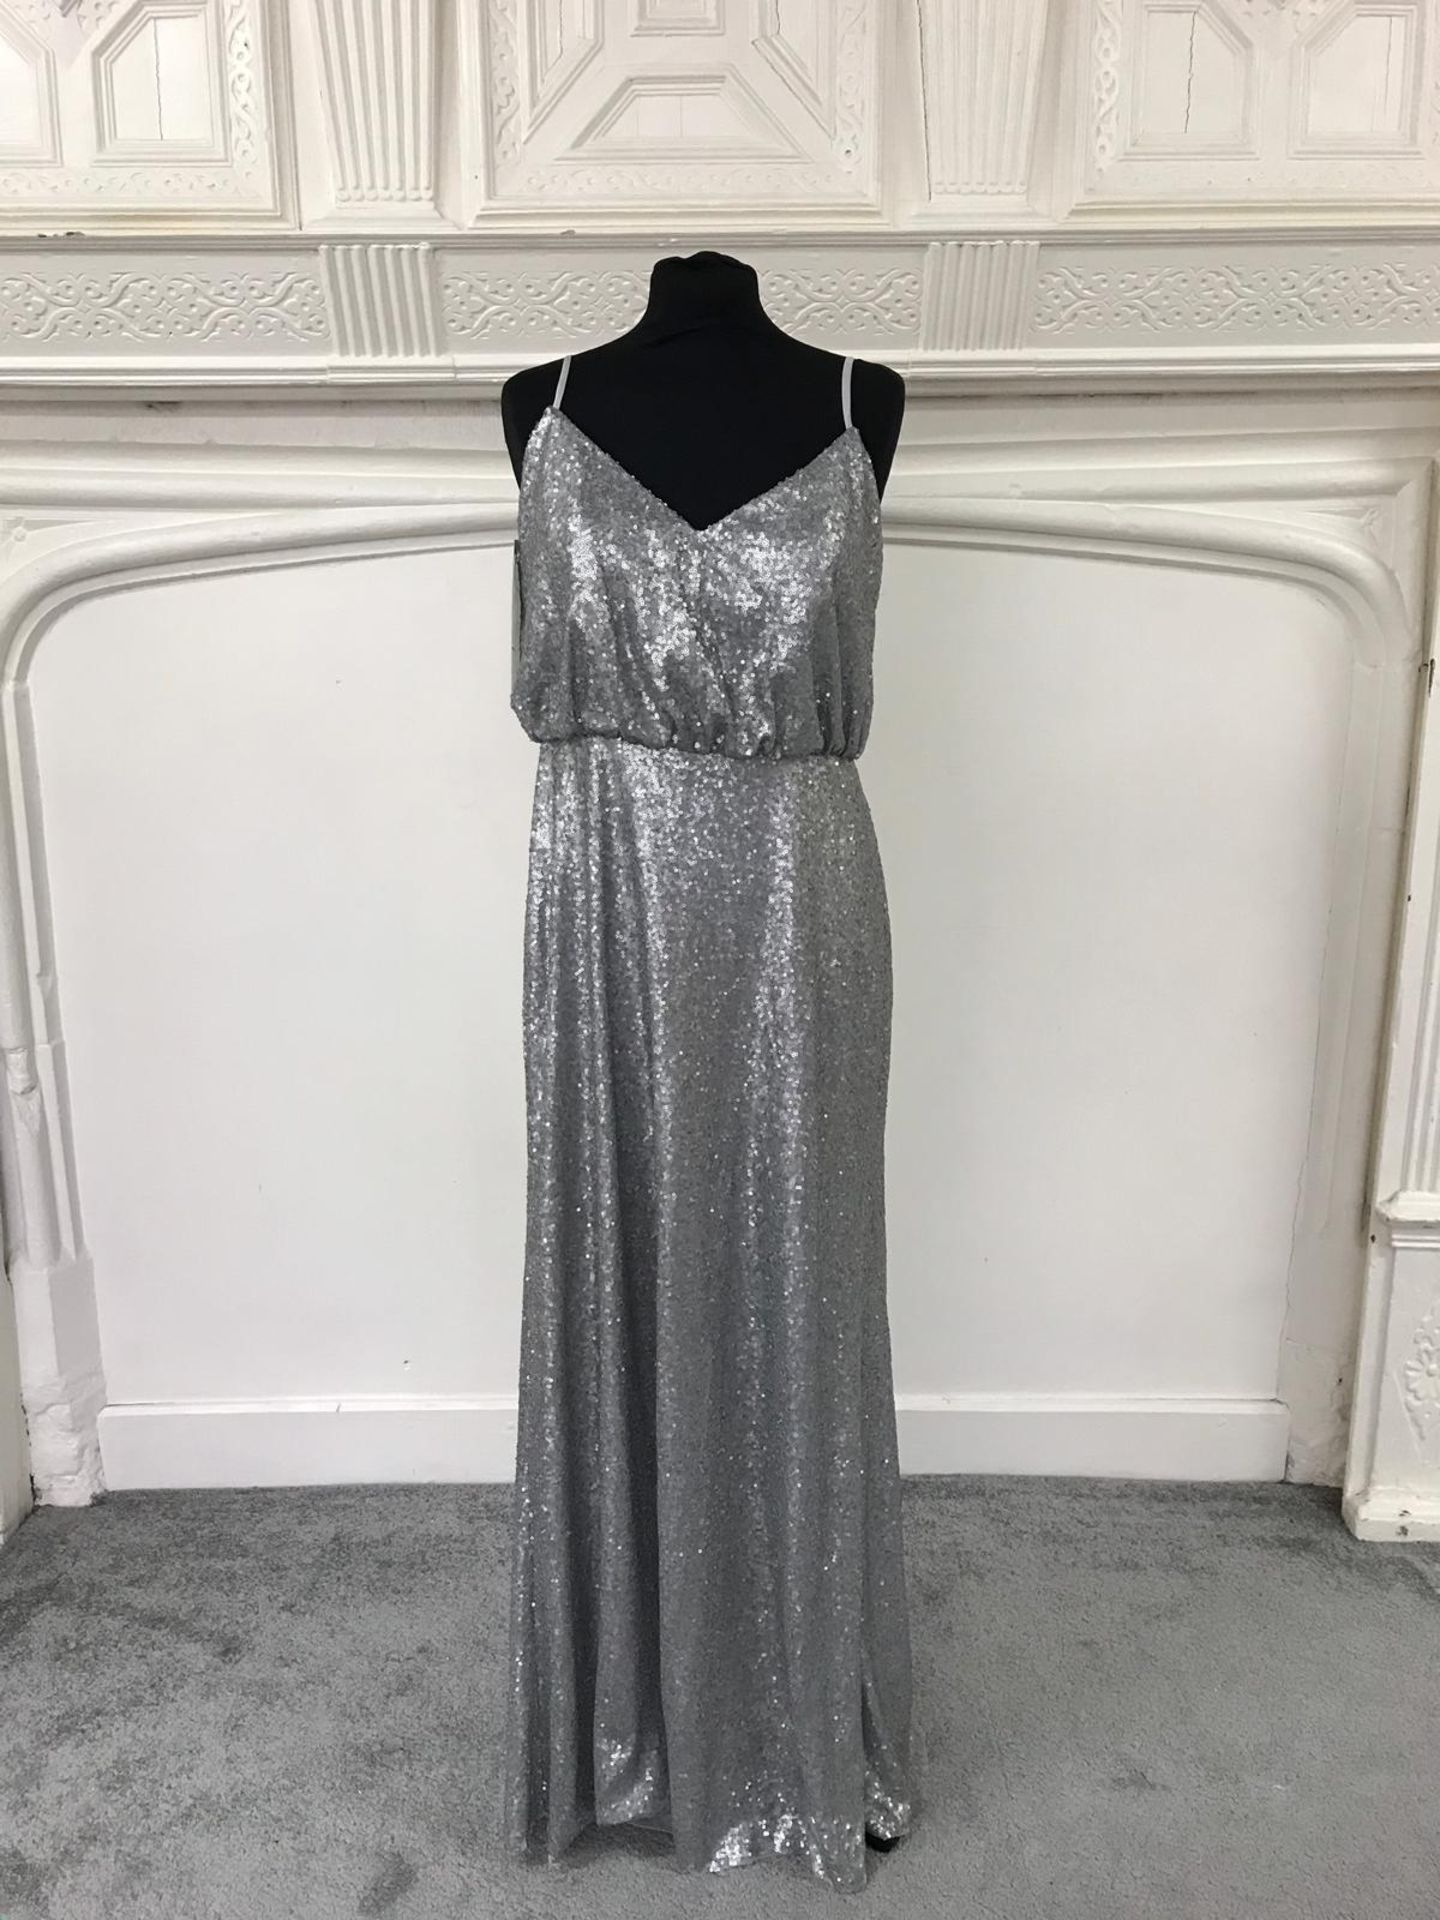 1 Dress. Silver Sequin Dress - Image 2 of 2